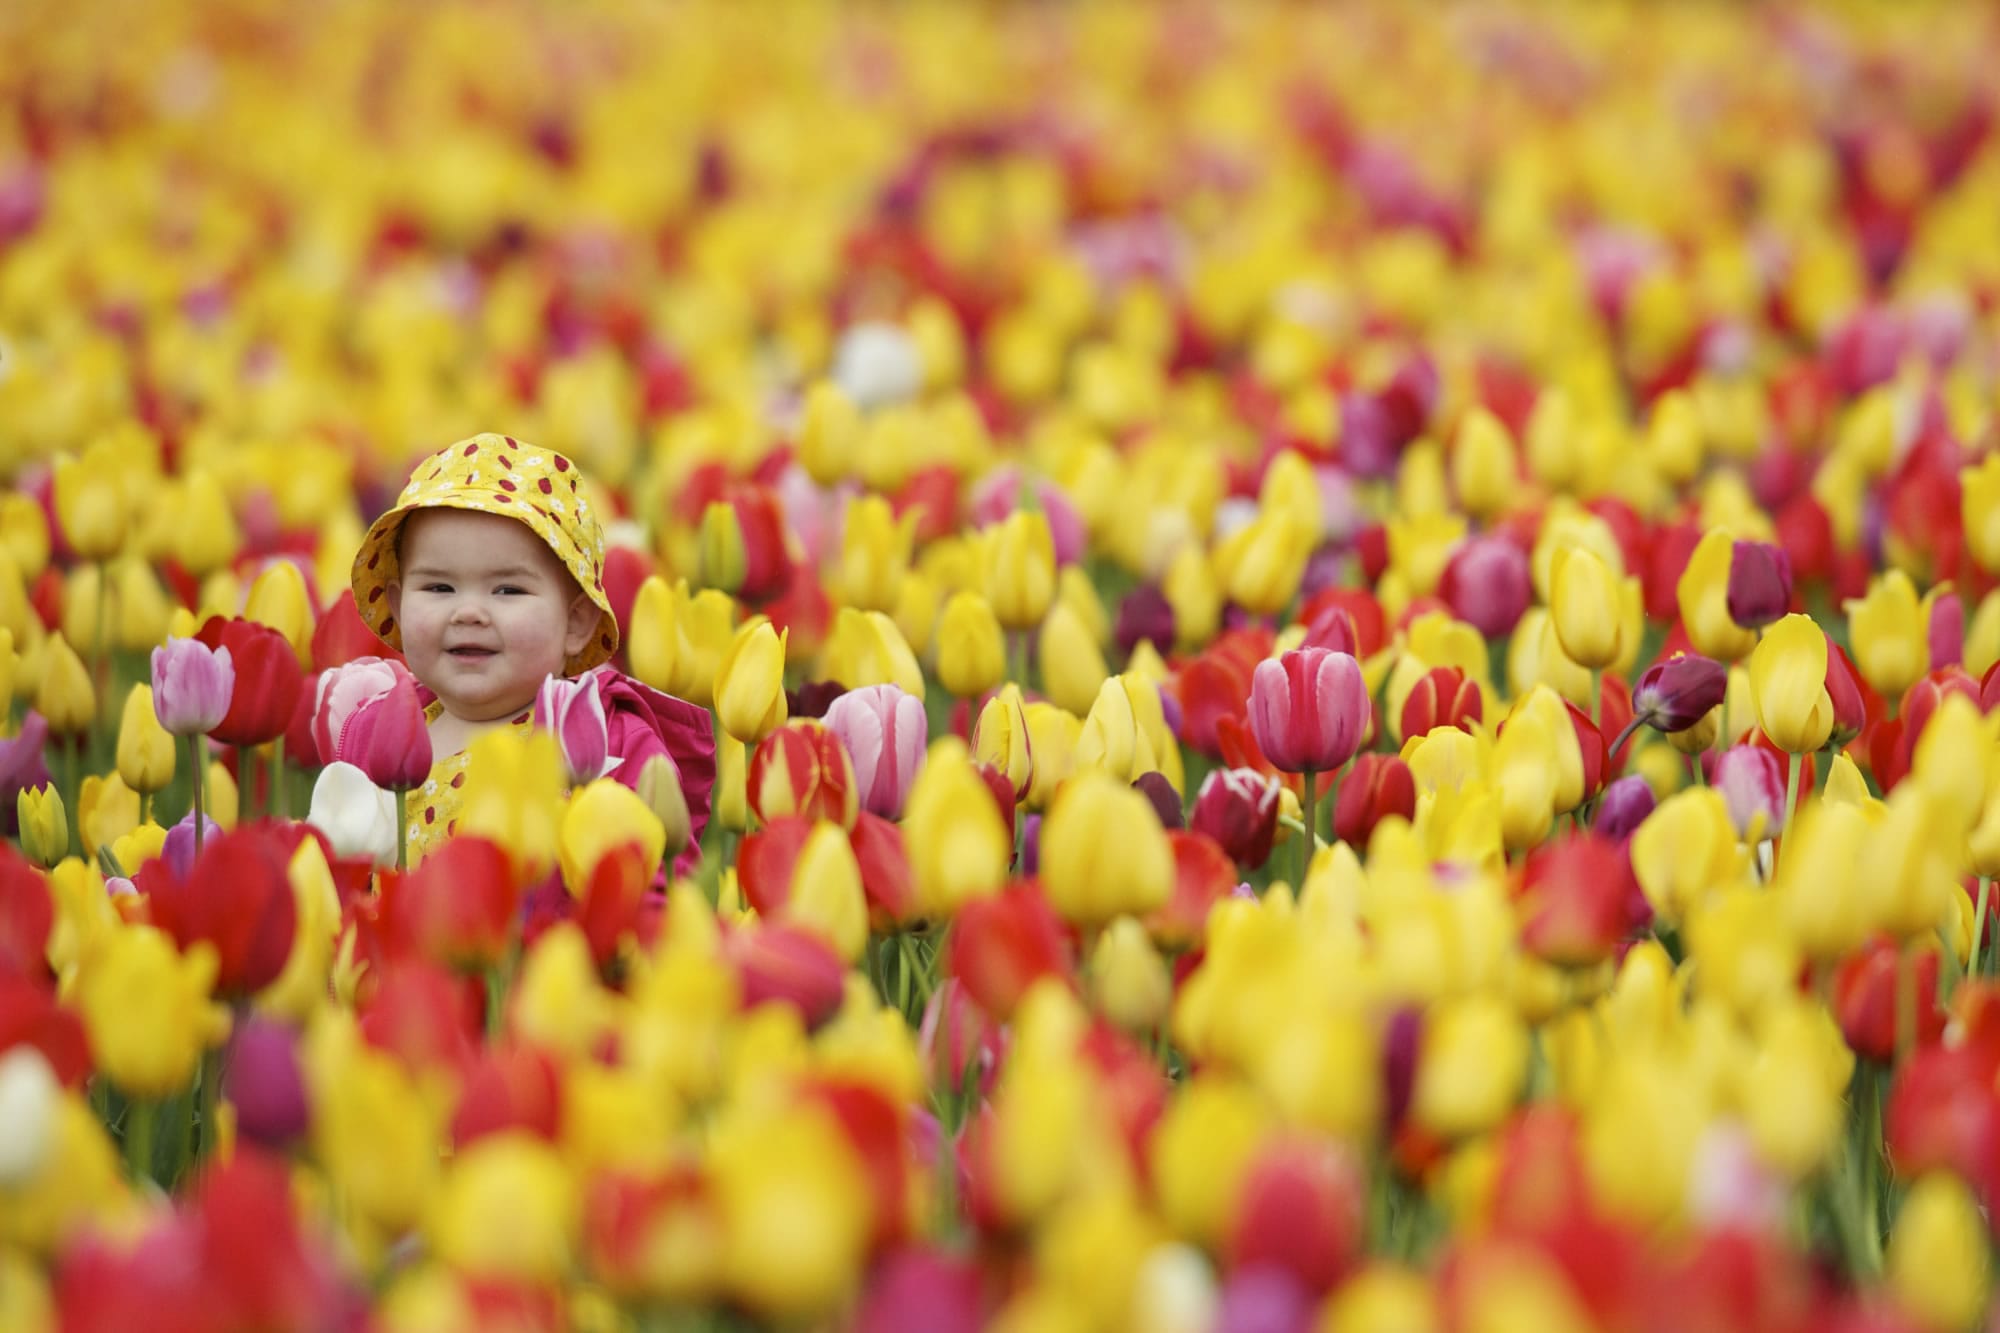 Aubrianna Hoskinson, 19 months, of Battle Ground is lost amid tulips Saturday at the Holland America Bulb Farms Tulip Festival in Woodland.